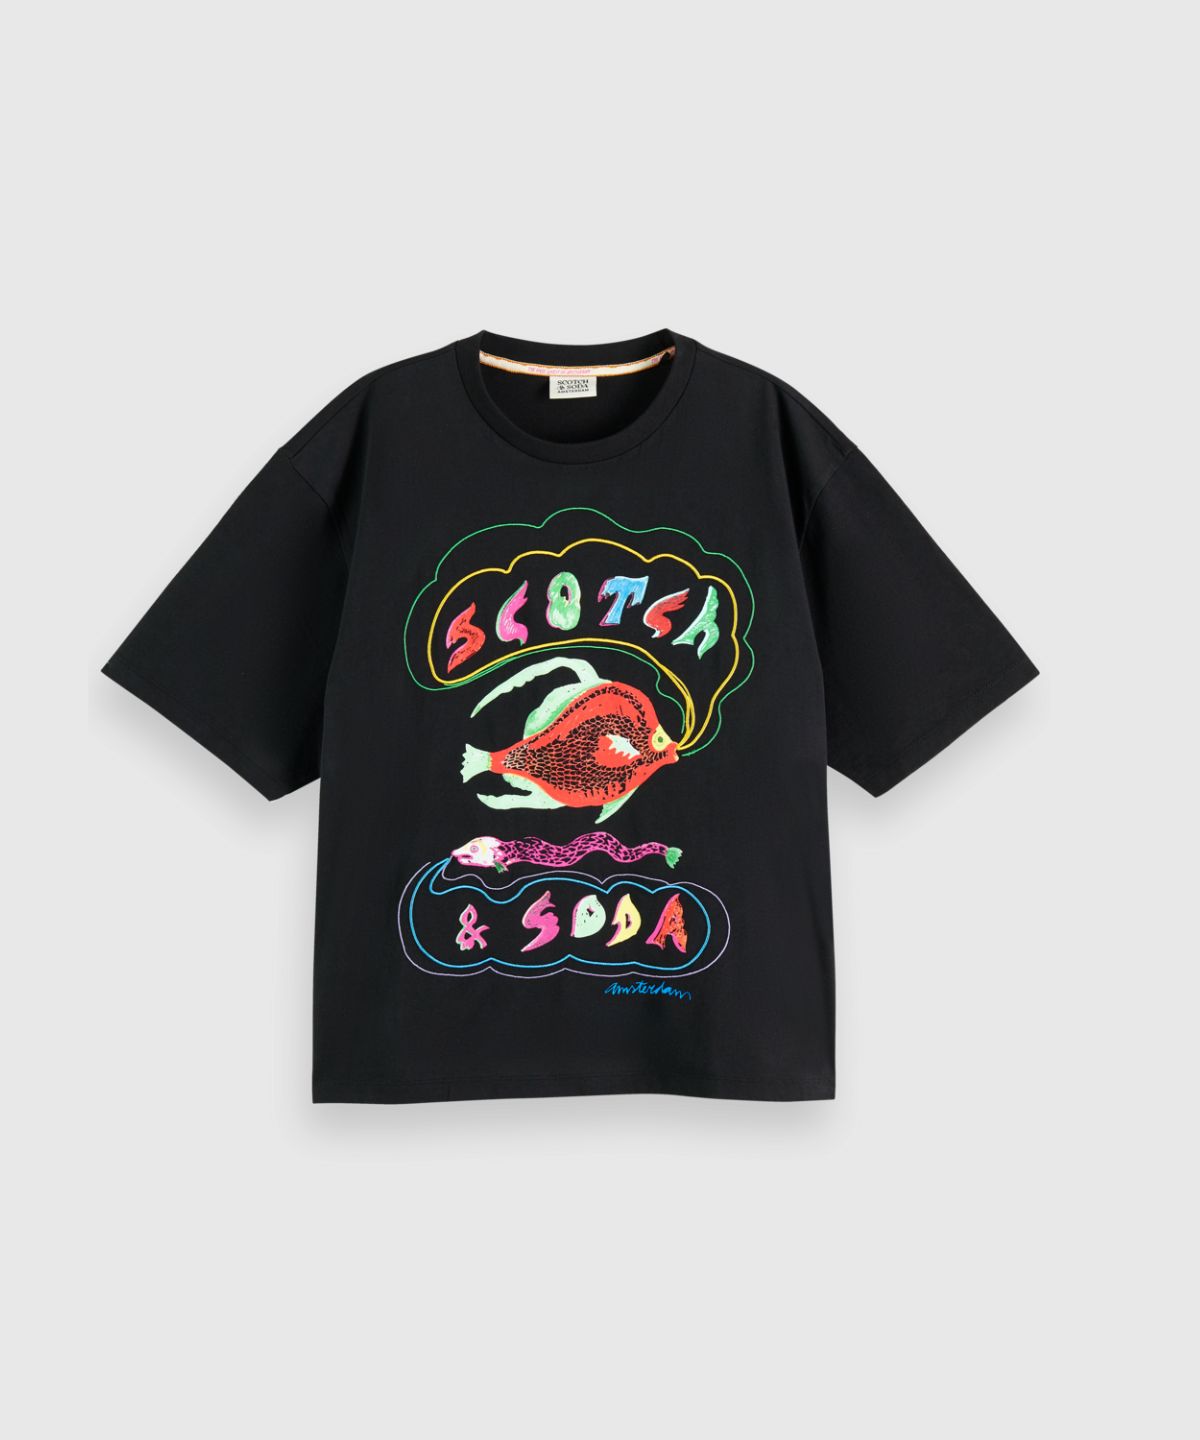 Loose fit T-shirt with front artwork